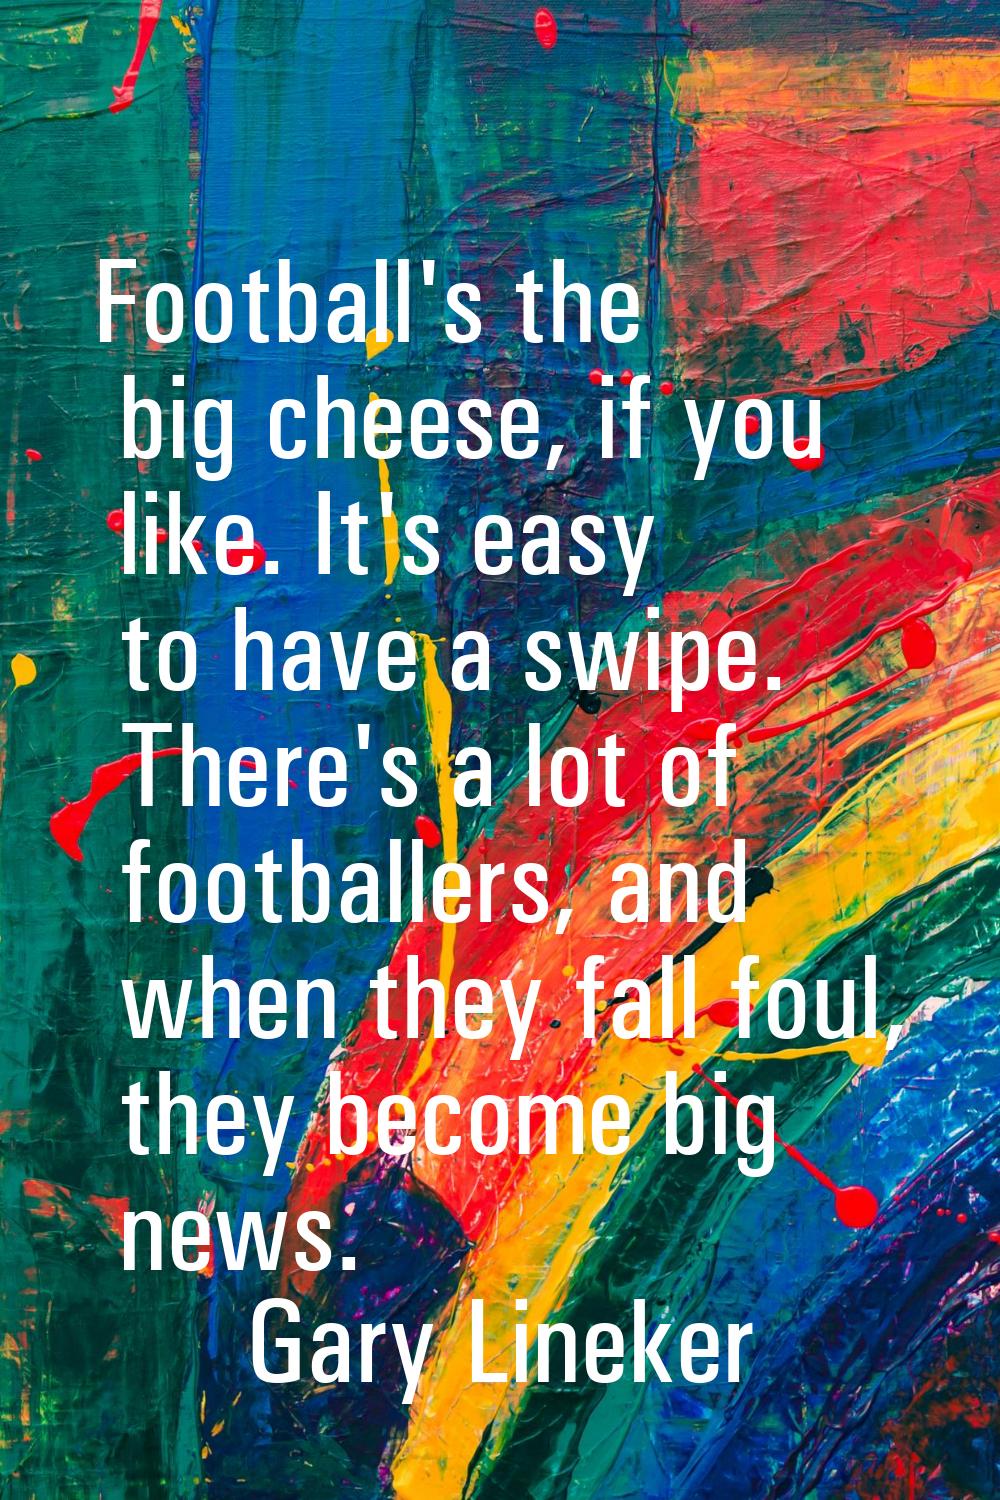 Football's the big cheese, if you like. It's easy to have a swipe. There's a lot of footballers, an